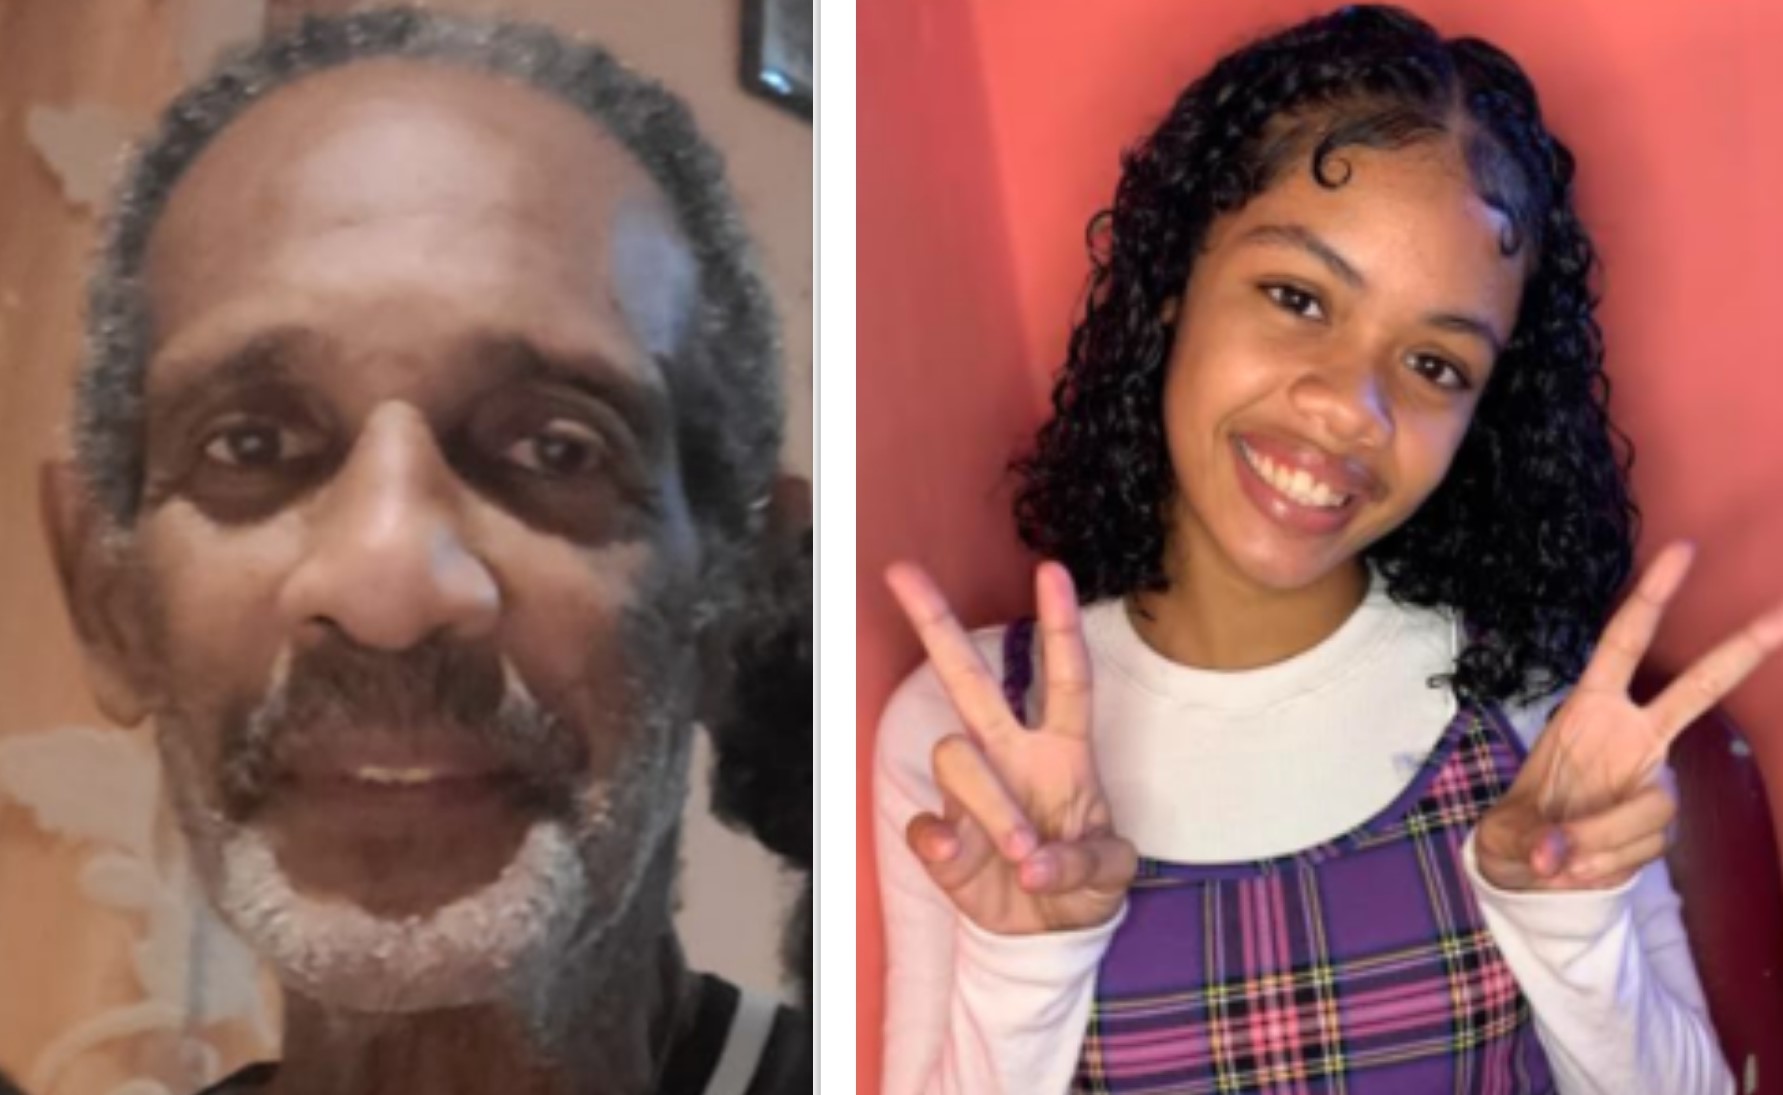 Search on for missing elderly man and 17-year-old girl